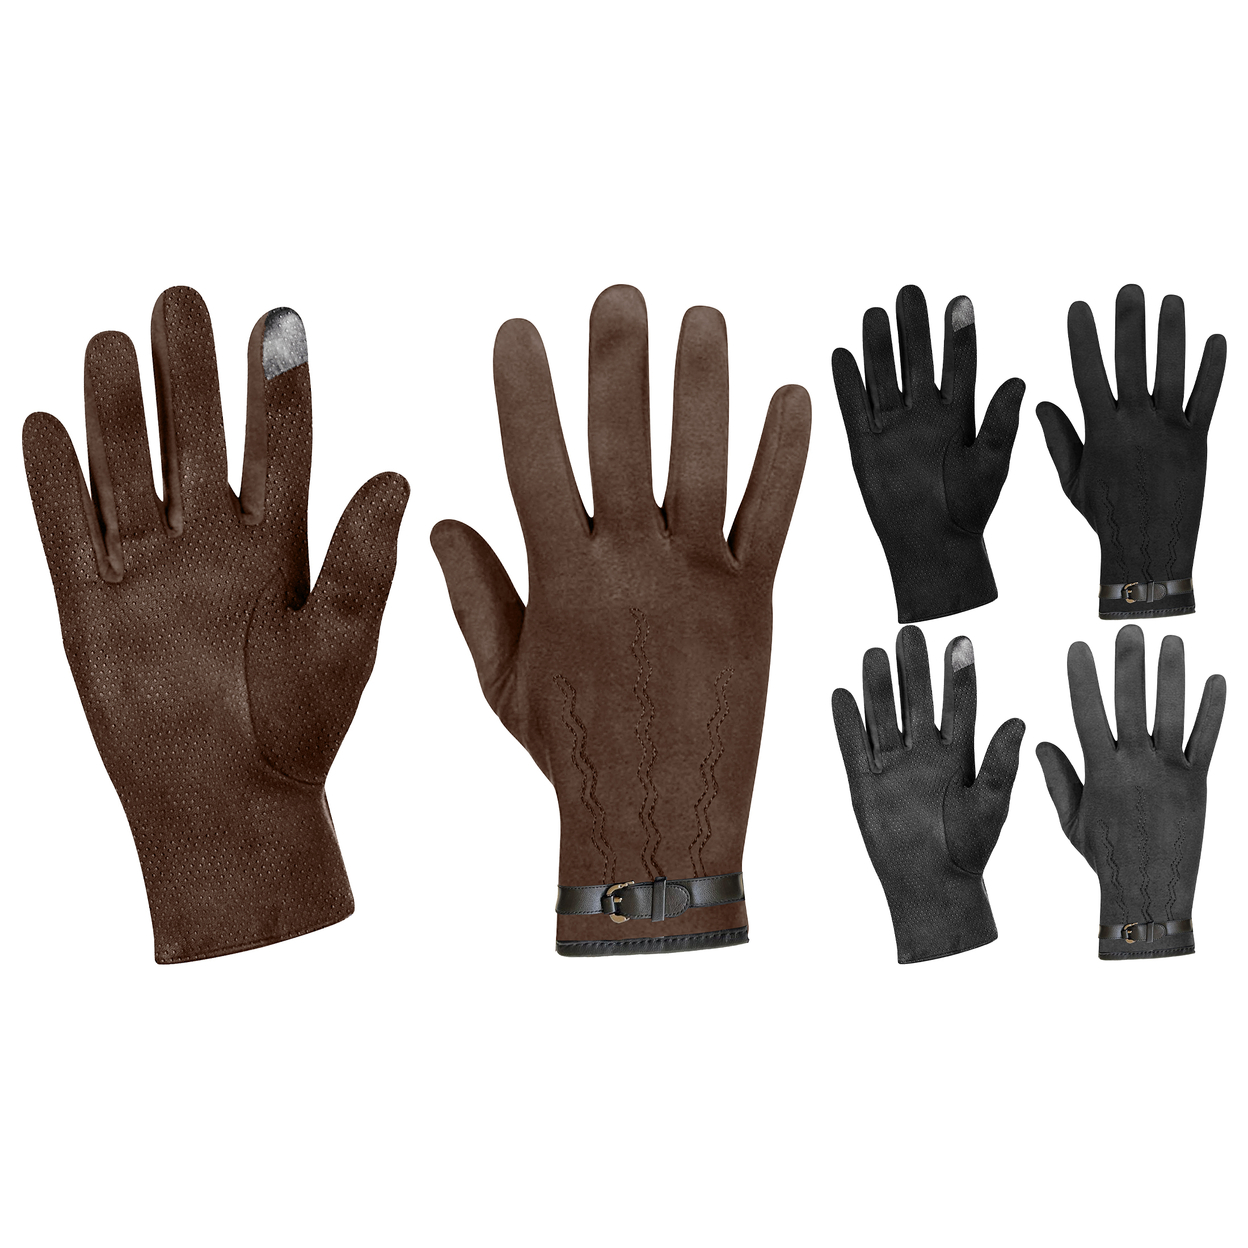 2-Pairs: Winter Warm Soft Lining Weather-Proof Touchscreen Suede Insulated Gloves - Black & Grey